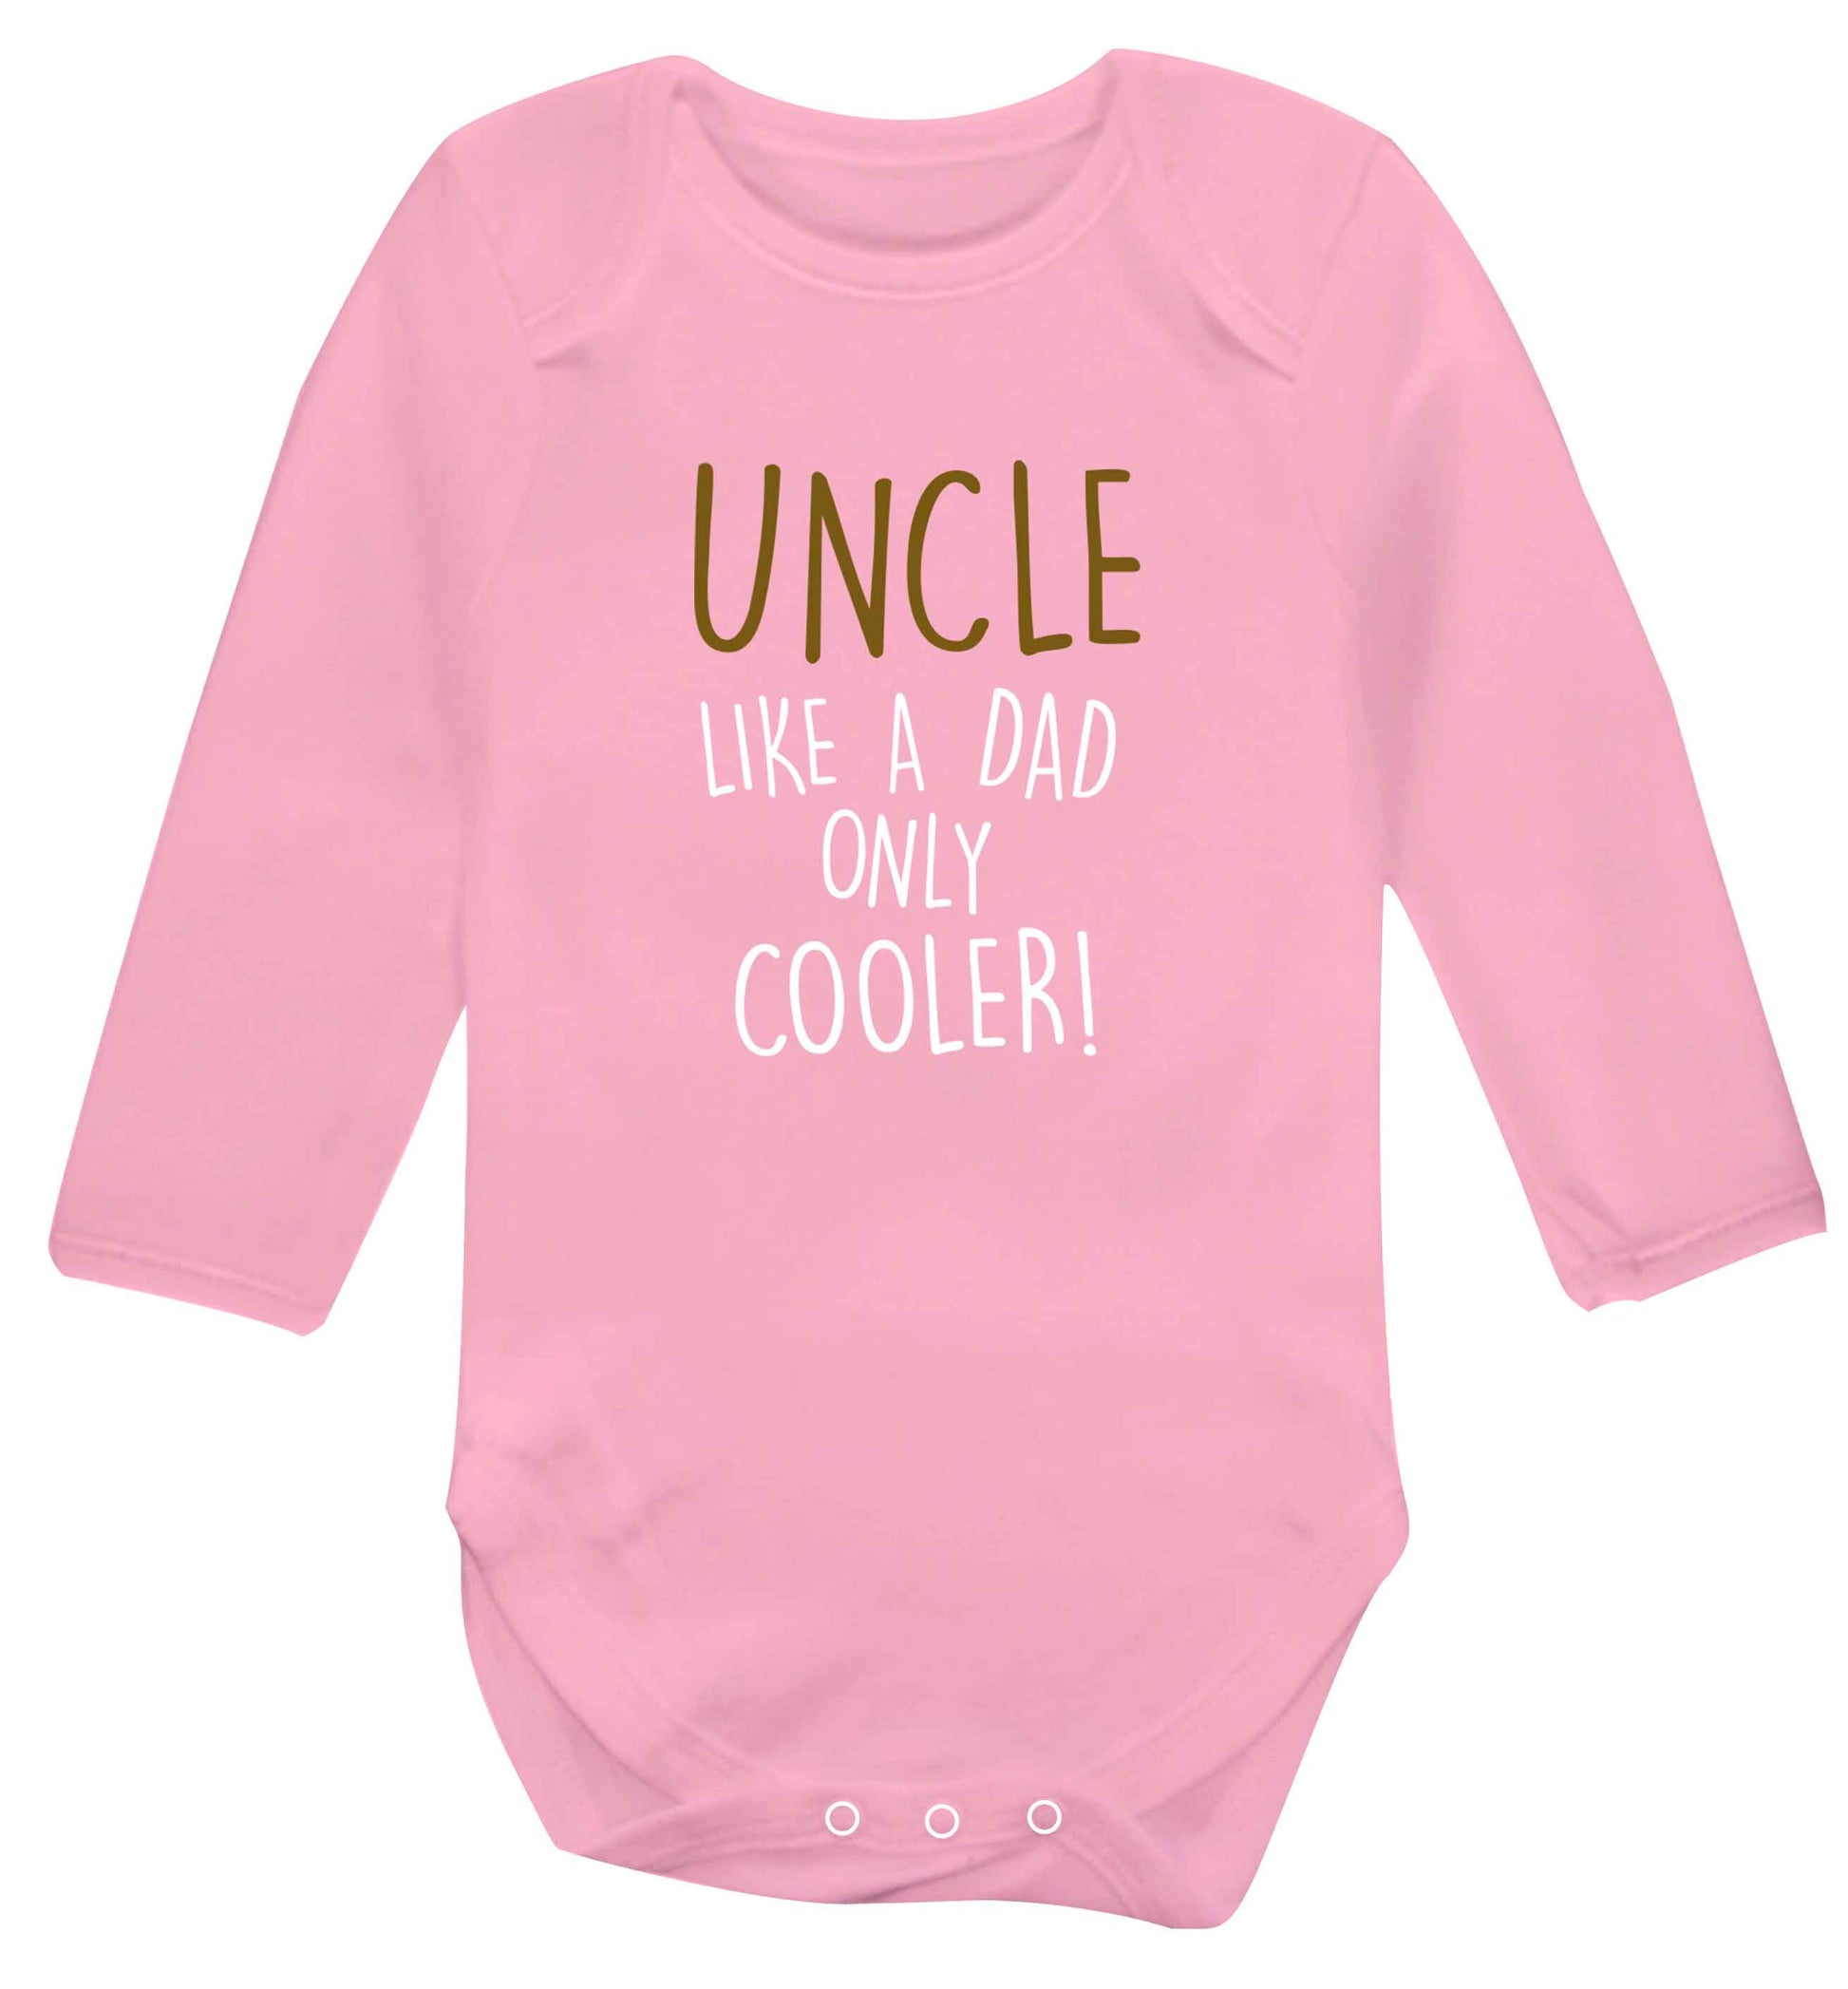 Uncle like a dad only cooler baby vest long sleeved pale pink 6-12 months